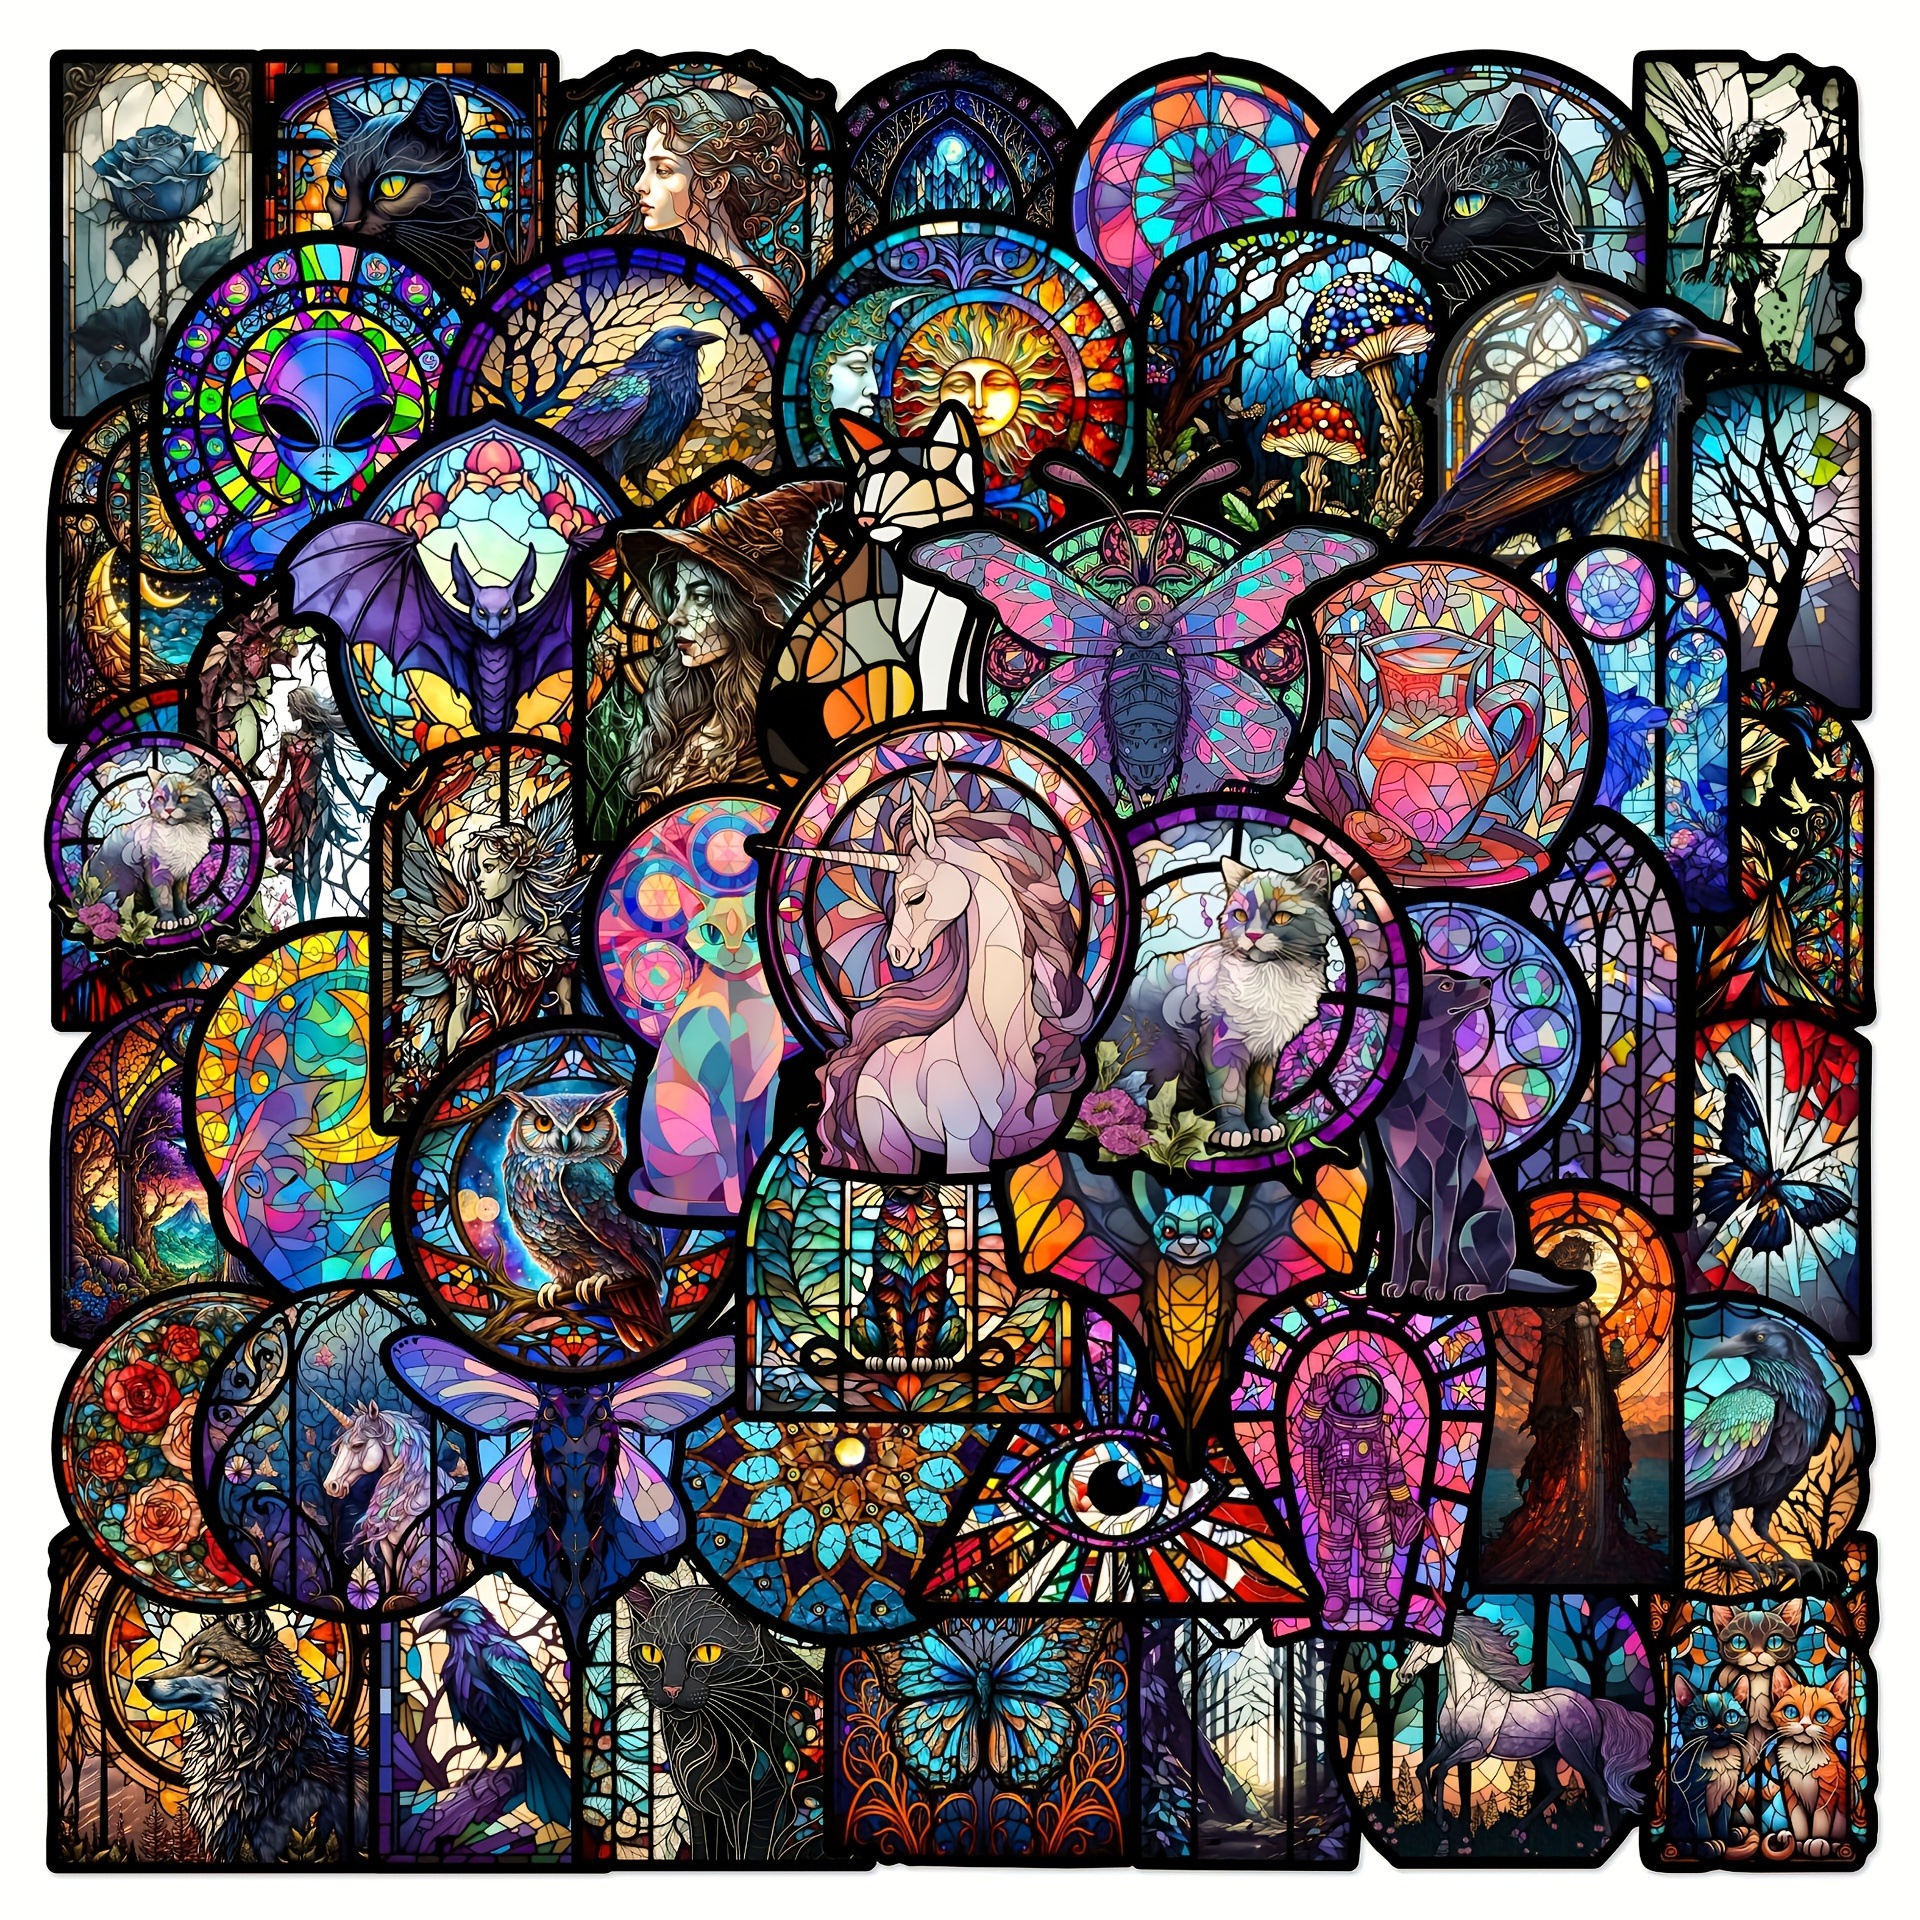 

50pcs Stained Glass Series Stickers, Waterproof Vinyl Stickers For Laptops, Water Bottles, Computers, And Mobile Phones, Perfect For Christmas Gifts For Adults, Students, And Employees Easter Gift